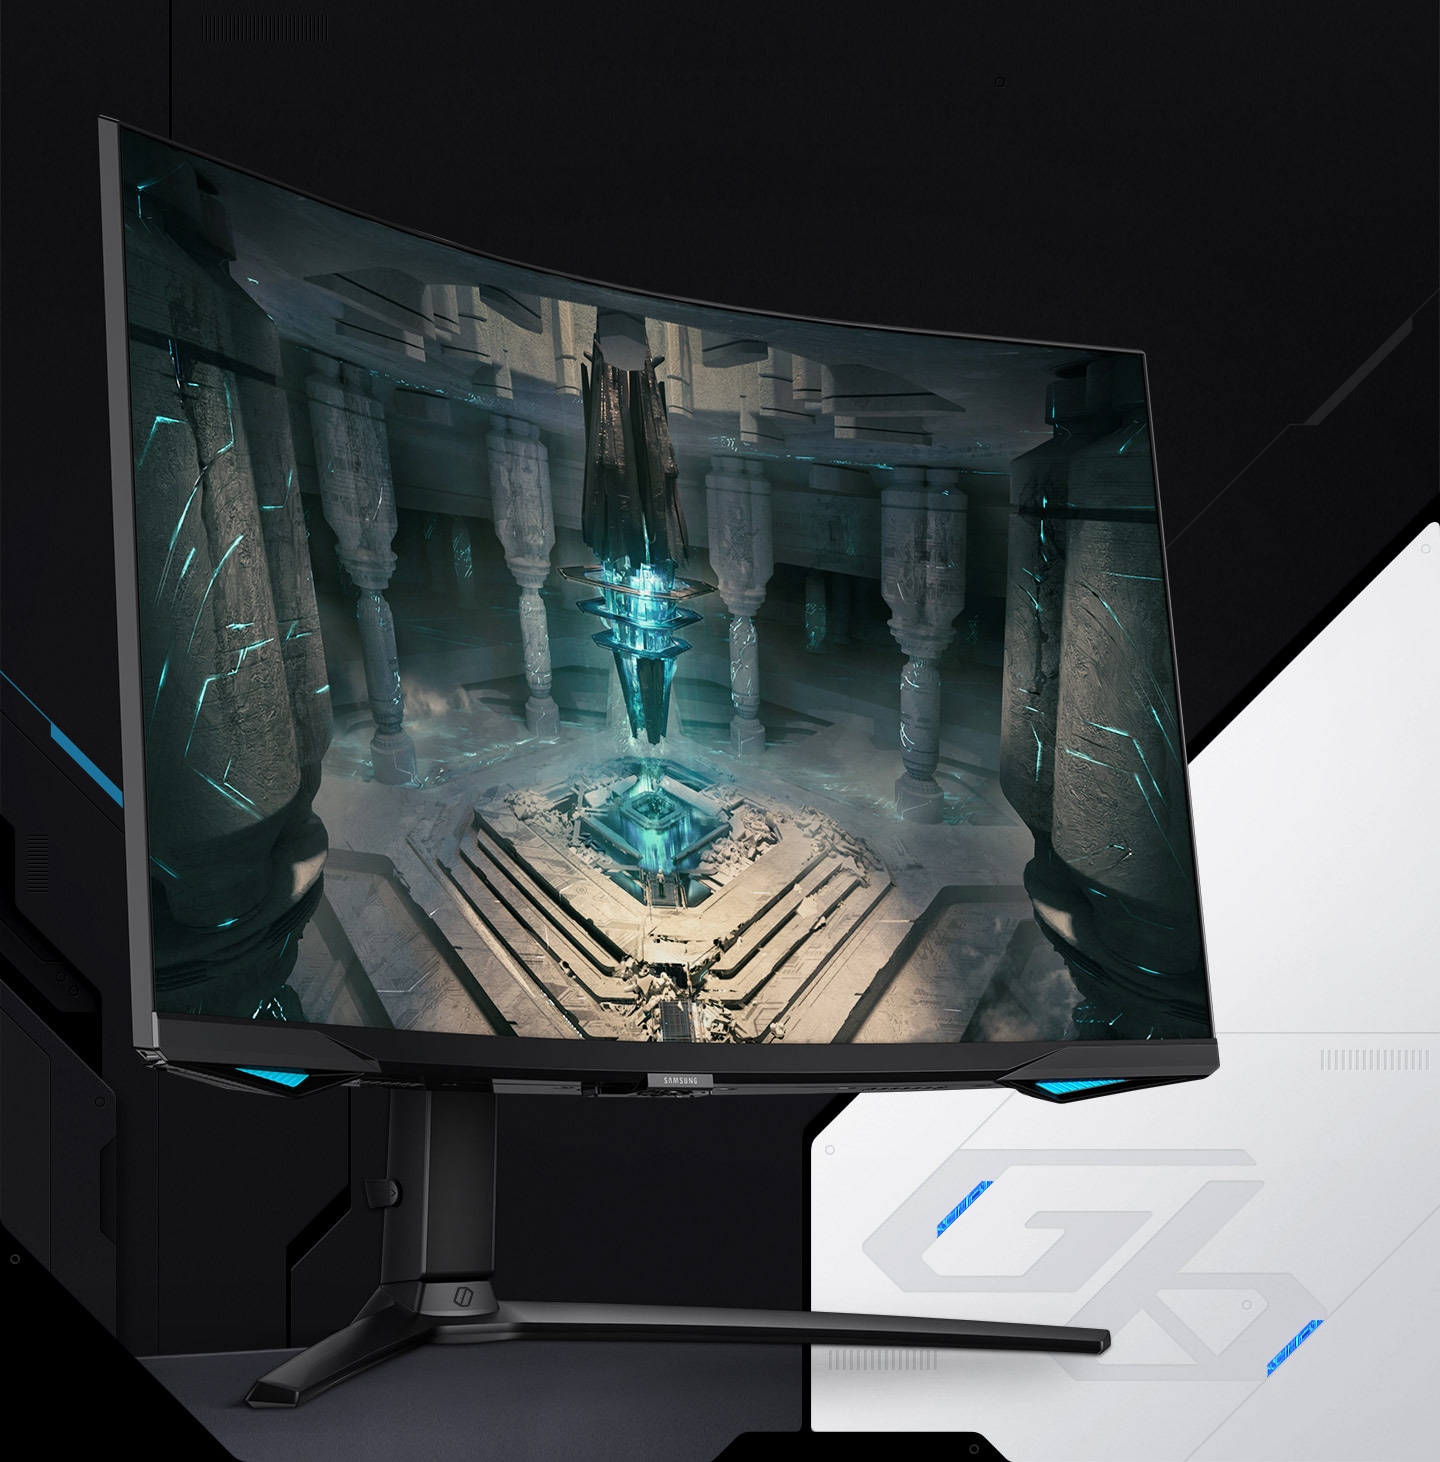 On the monitor display is a skyblue rocket ship with light emitting from its engine exhausts inside an underground cave. The rocket ship is set to launch out of the opening above, and surrounded by stone pillars and steps. G6 logo is placed on the right side of the monitor stand.